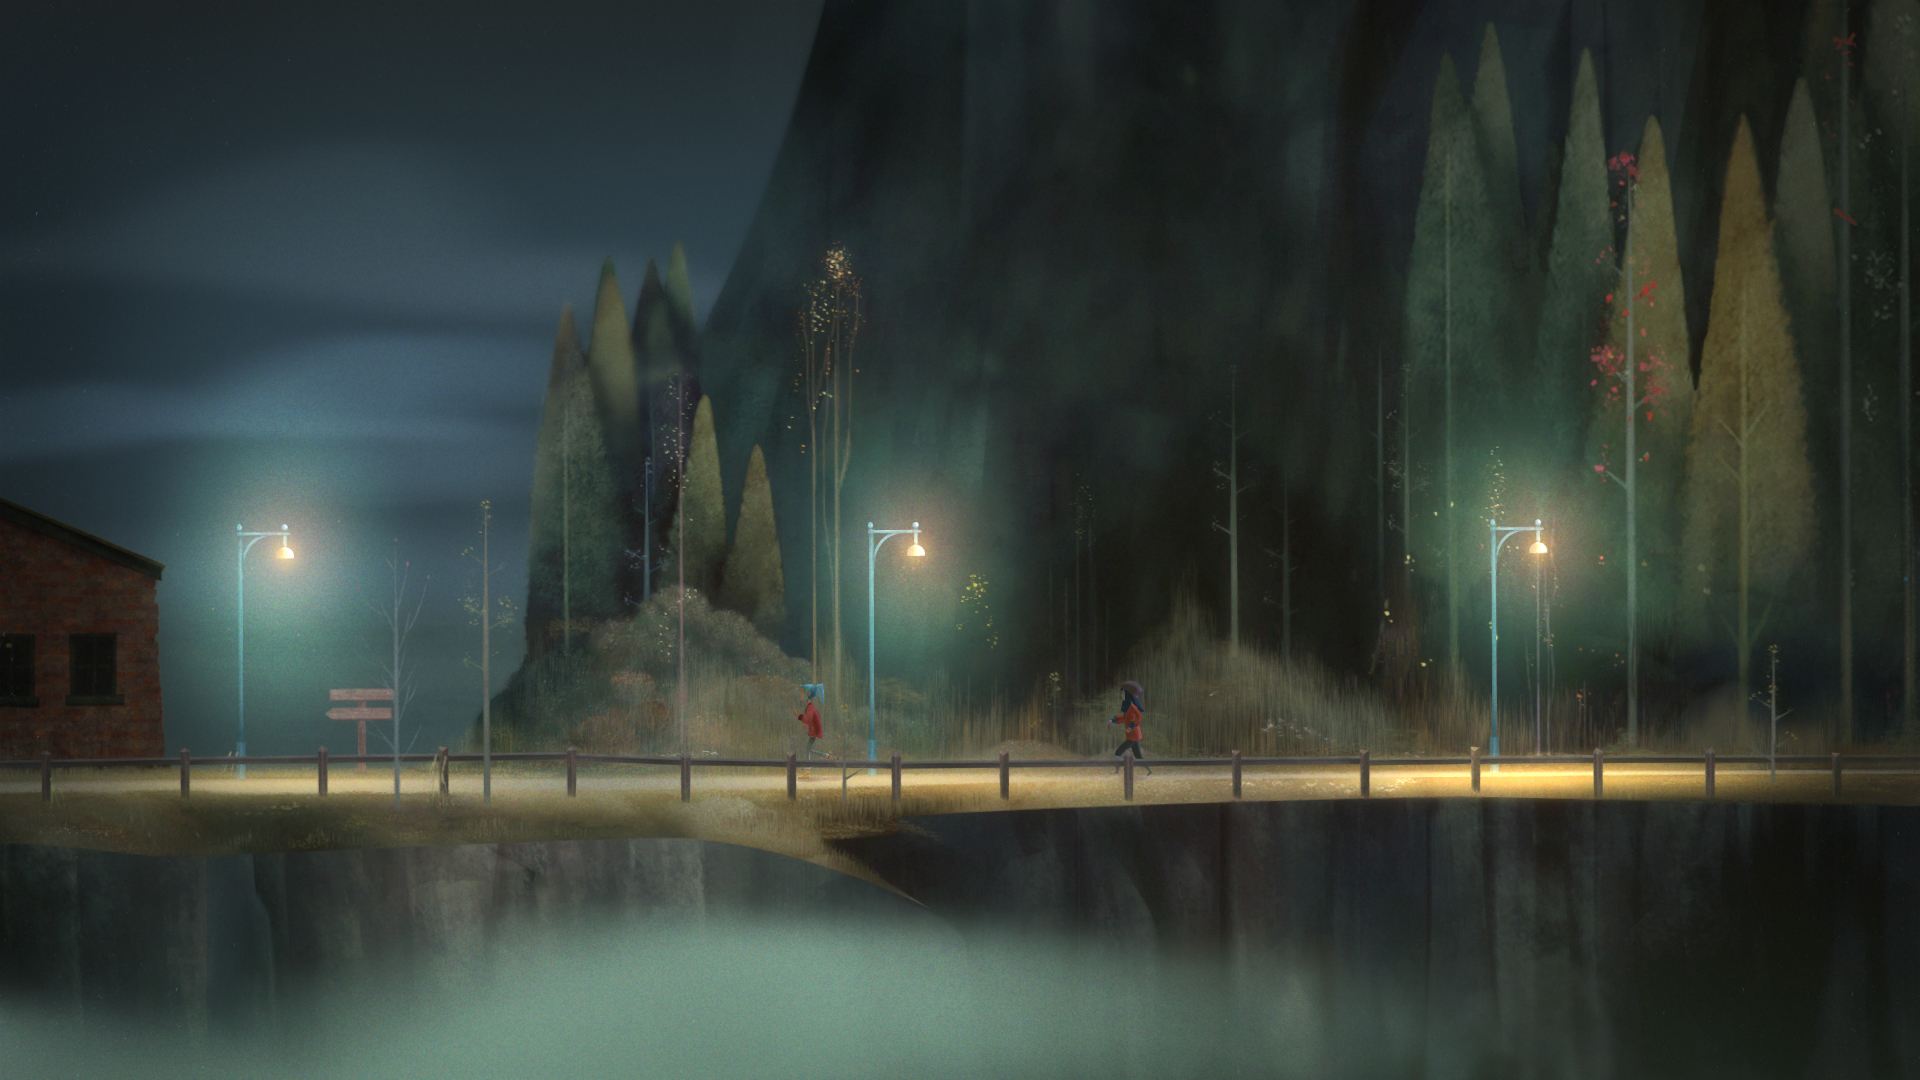 Underrated Switch Games – Oxenfree protagonists Alex and Jonas walking along a forest road lit by street lamps at night